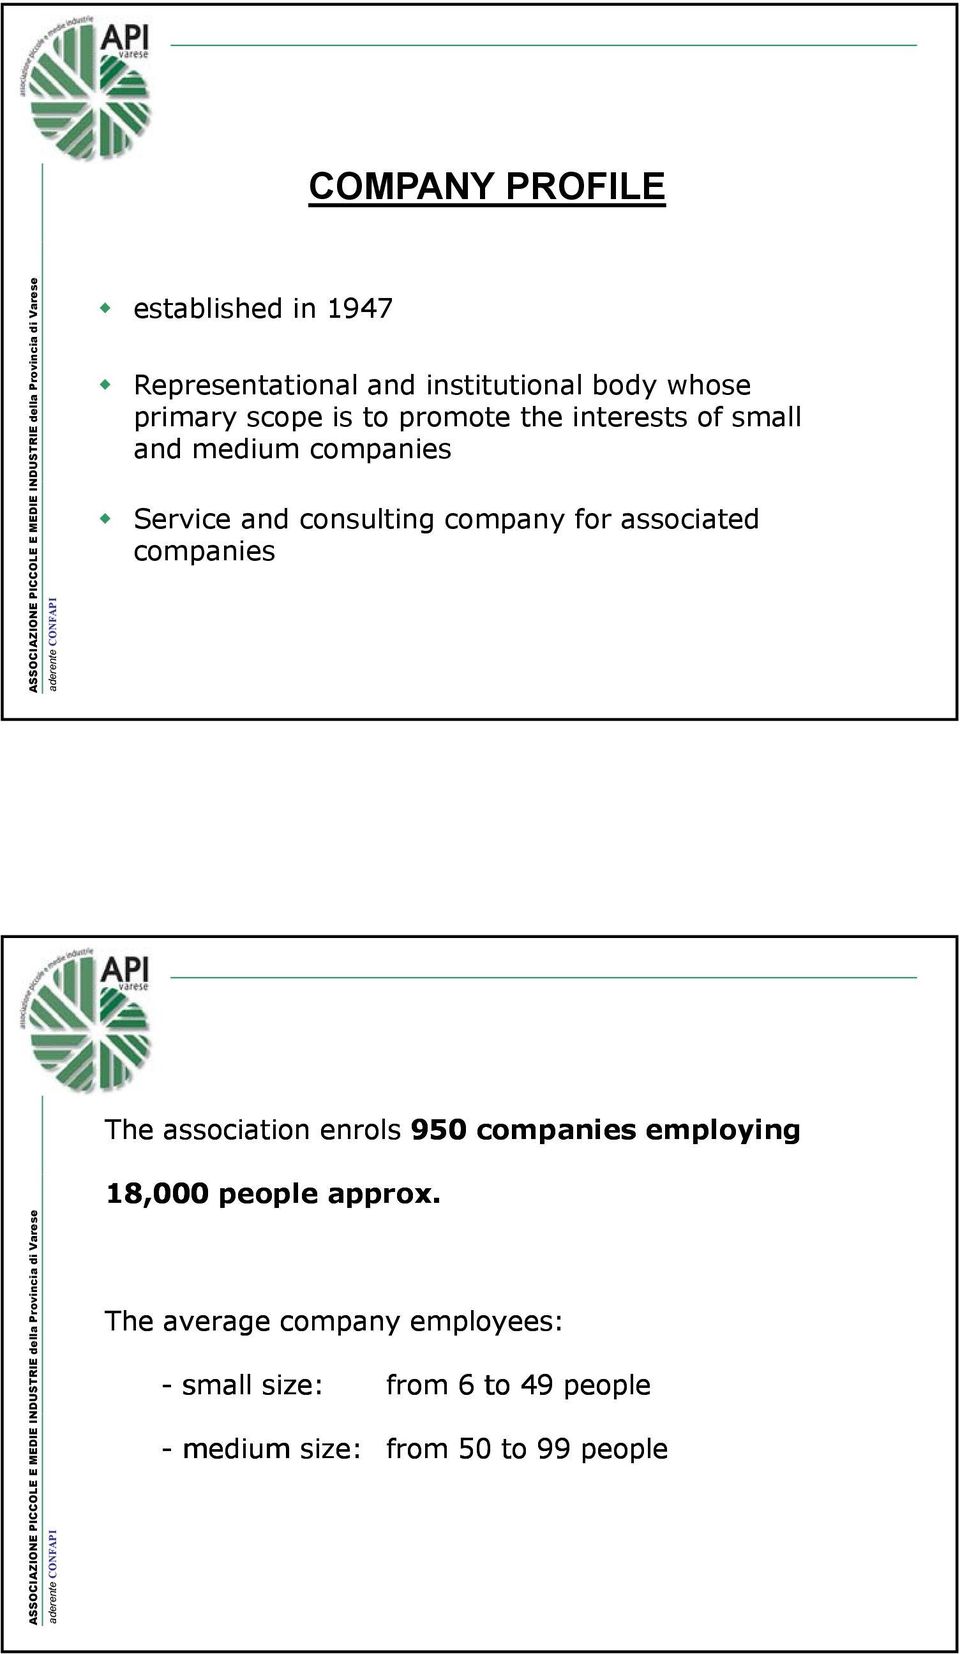 for associated companies The association enrols 950 companies employing 18,000 people approx.